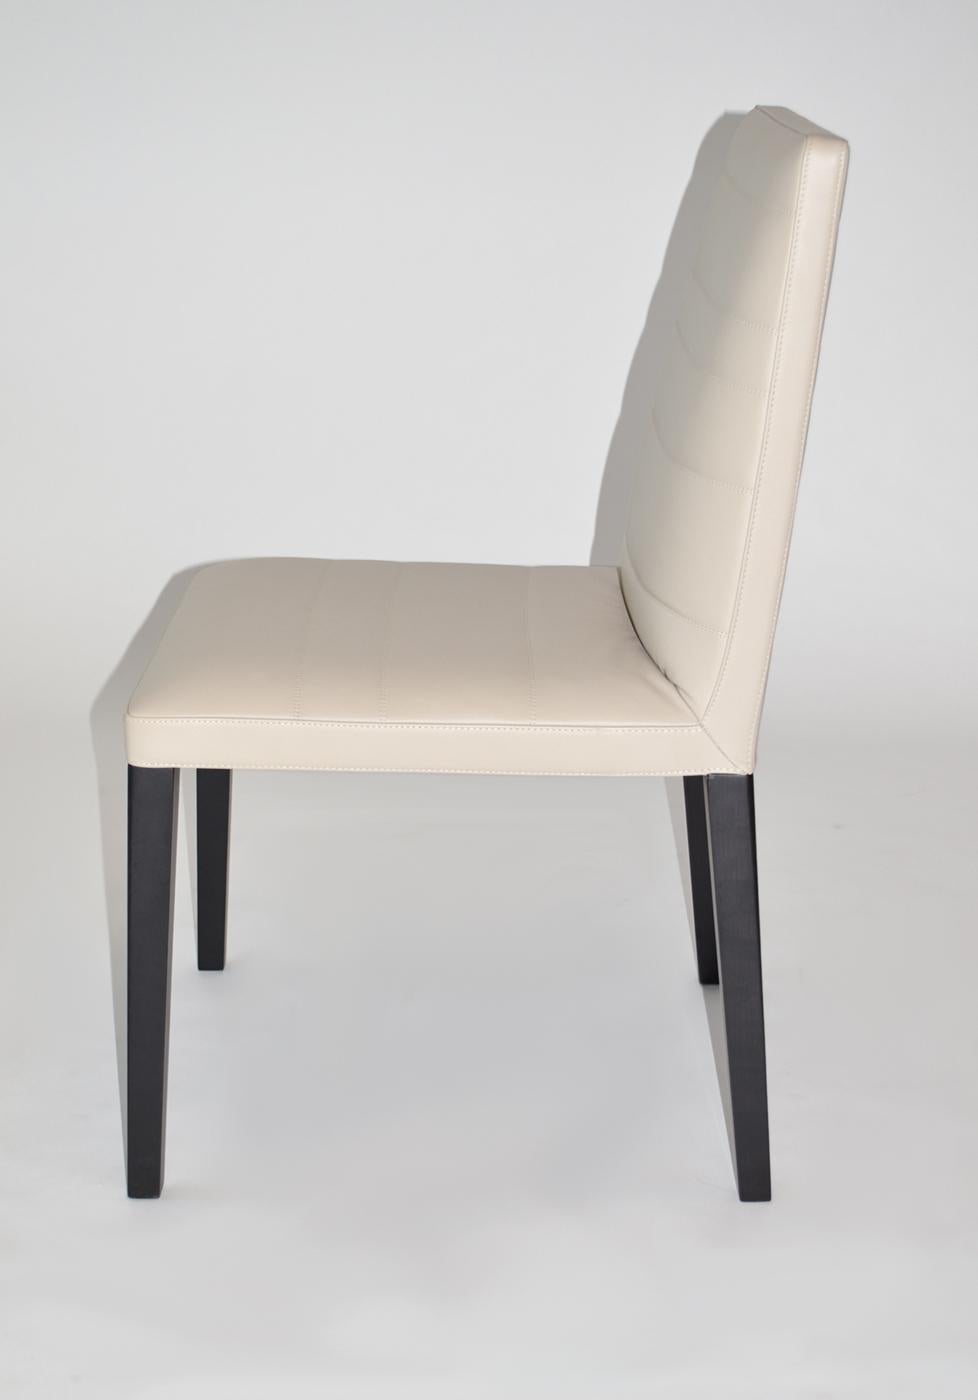 Modern Set of Four Leather and Wood Dining Chairs by Poltrona Frau. 'Louise' 